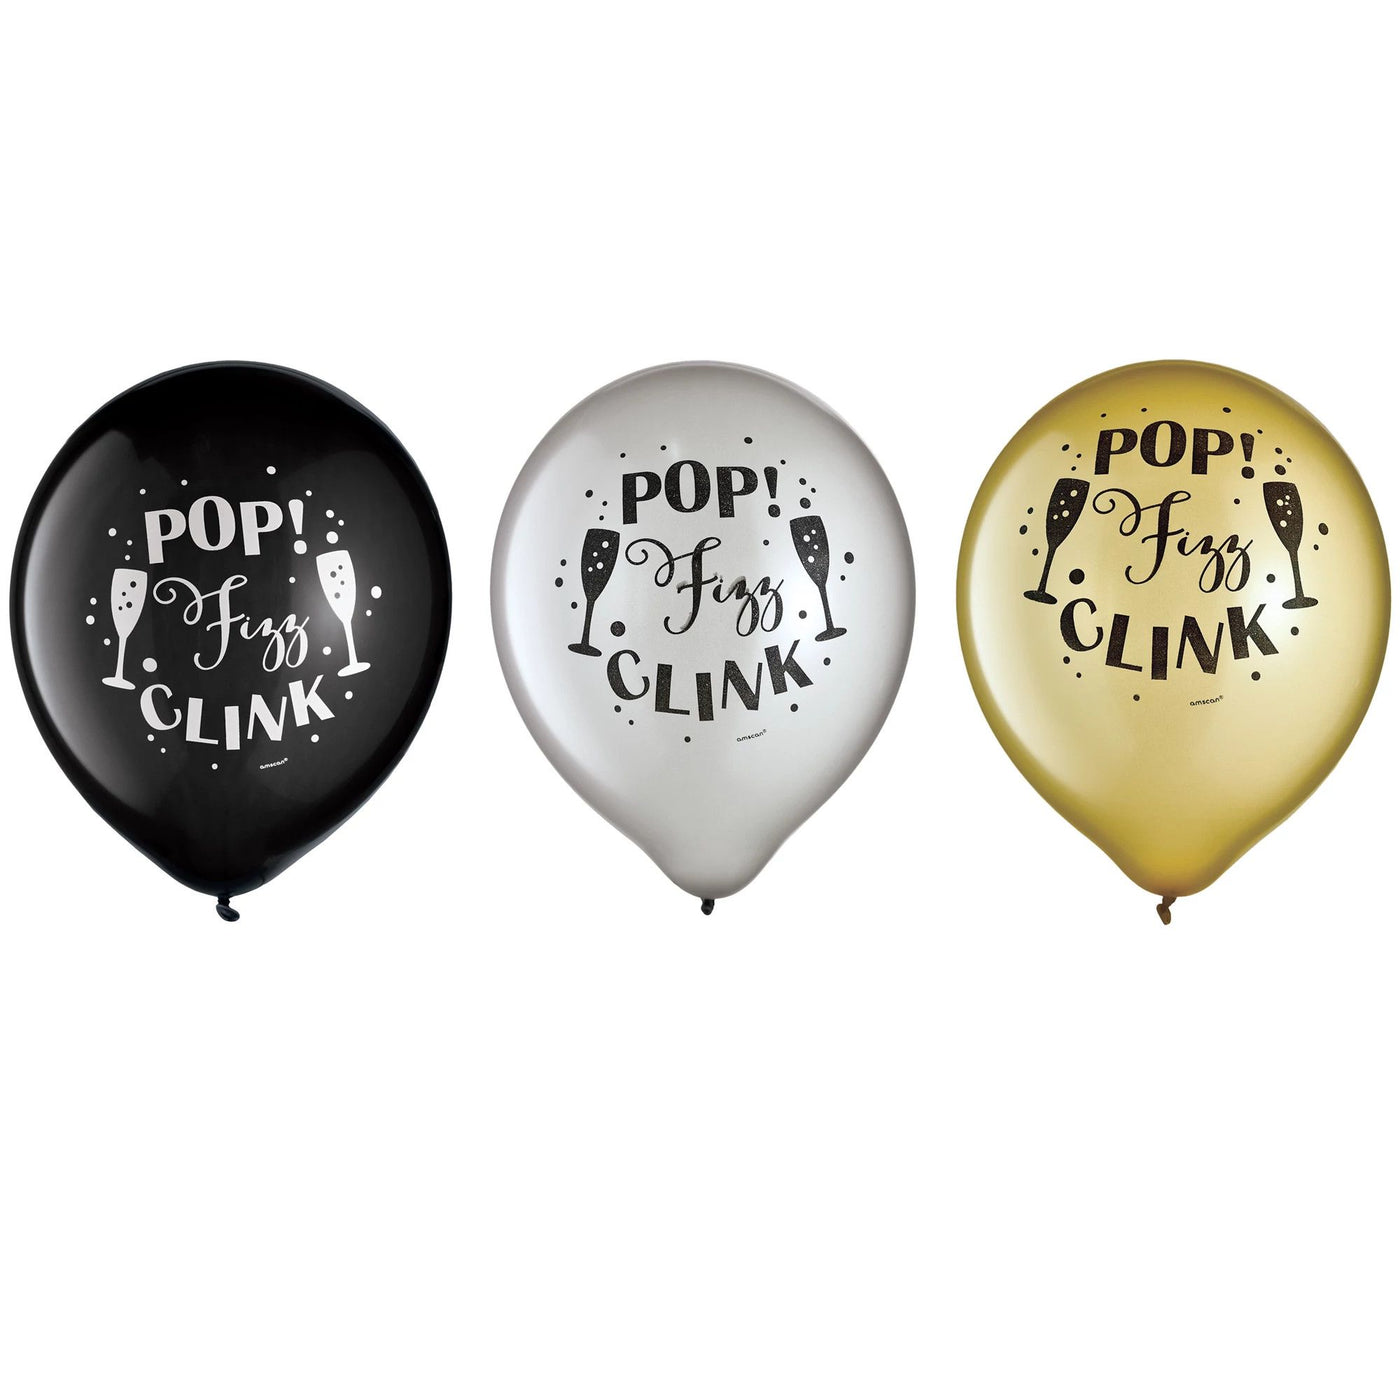 Pack of 15 New Years Balloons